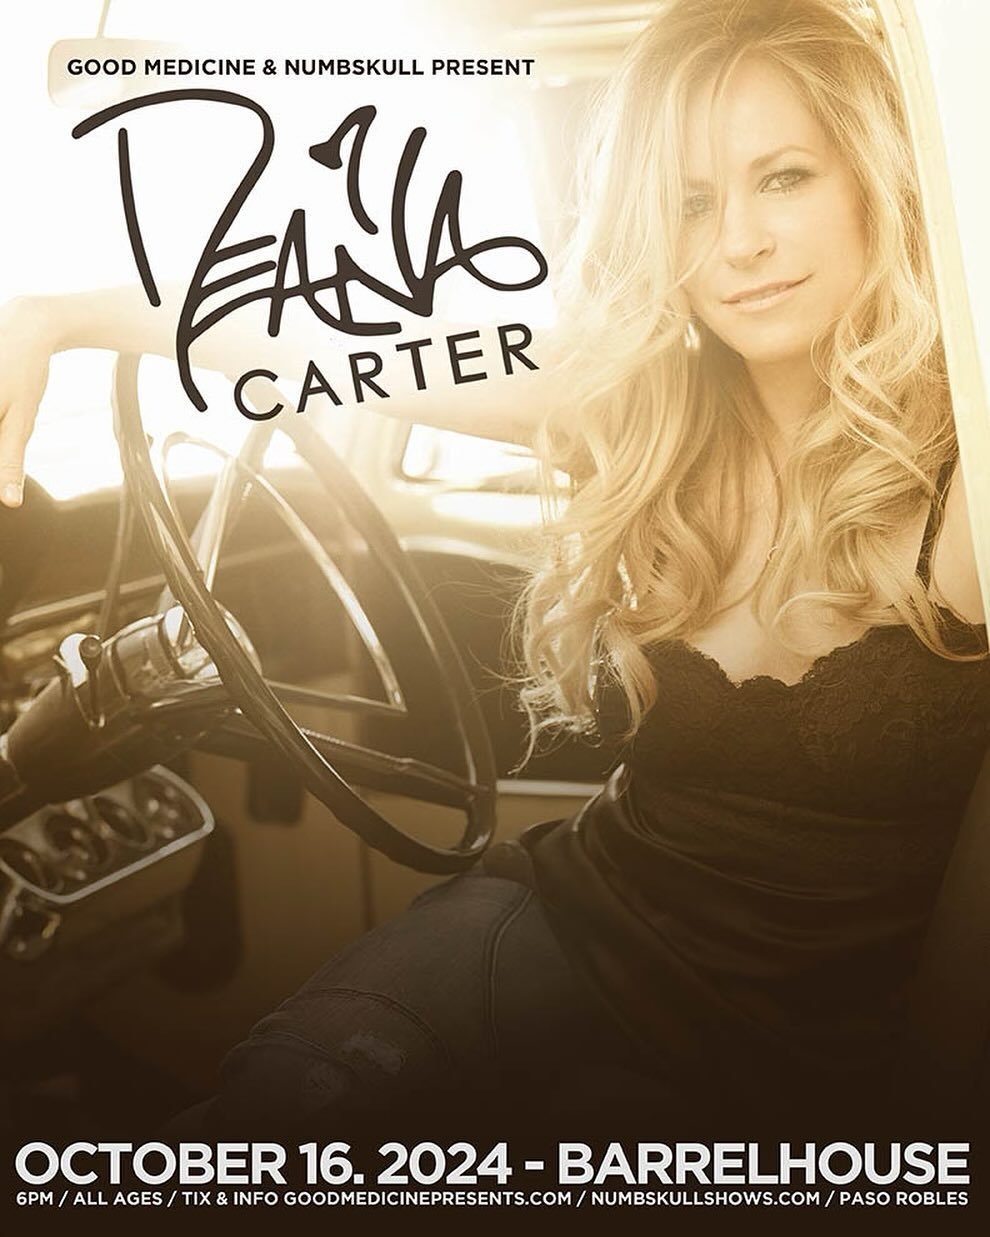 Exciting News! Deana Carter is coming to BarrelHouse Brewing Company on October 16th, and you&rsquo;re invited to join the party! Doors open at 6 PM for an unforgettable evening of live music and Good Times.

From her chart-topping hits to soul-stirr